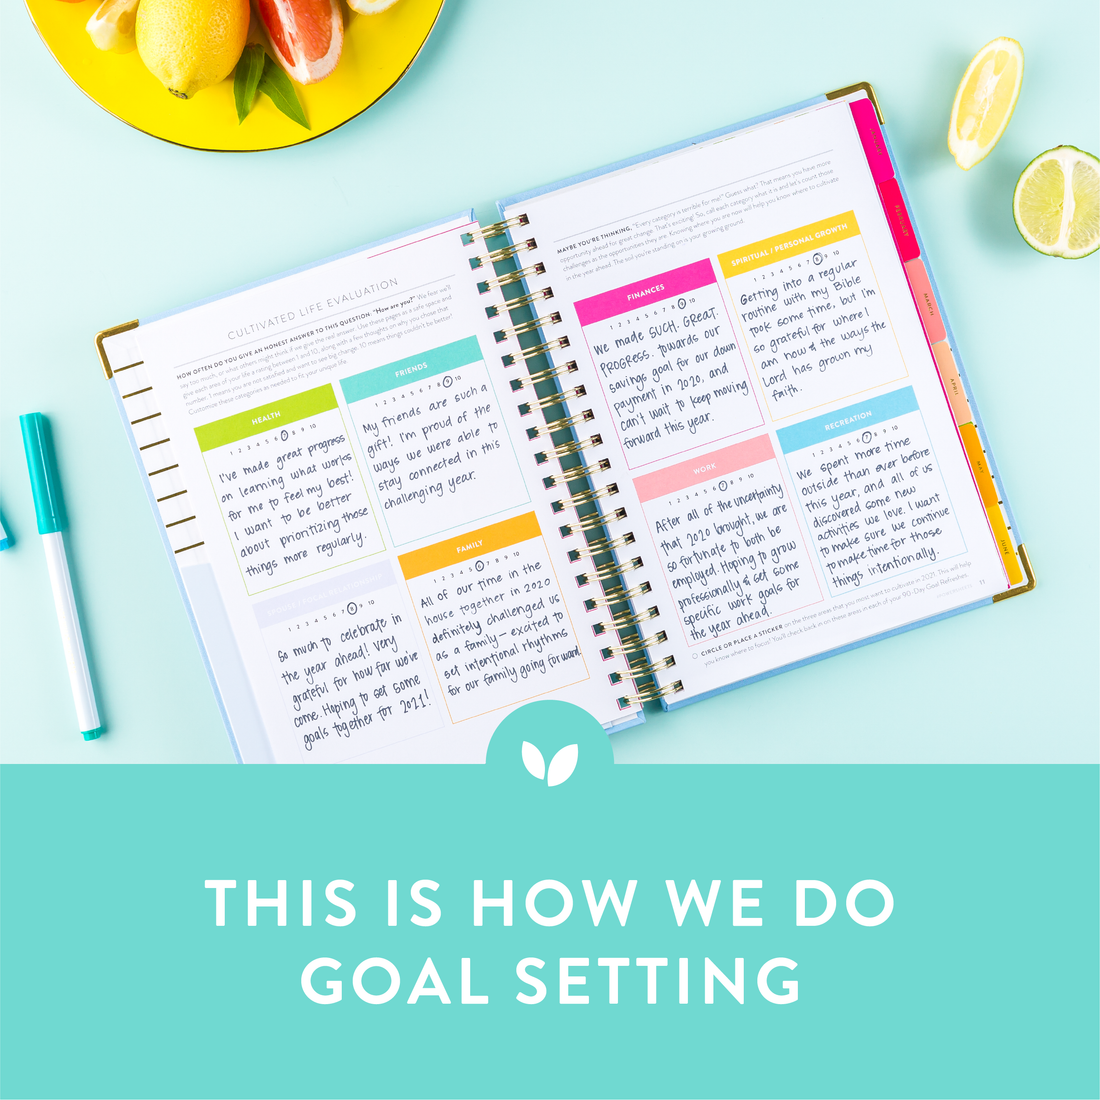 How We Do Goal Setting: Habit Tracking, 90-Day Windows, and Heart